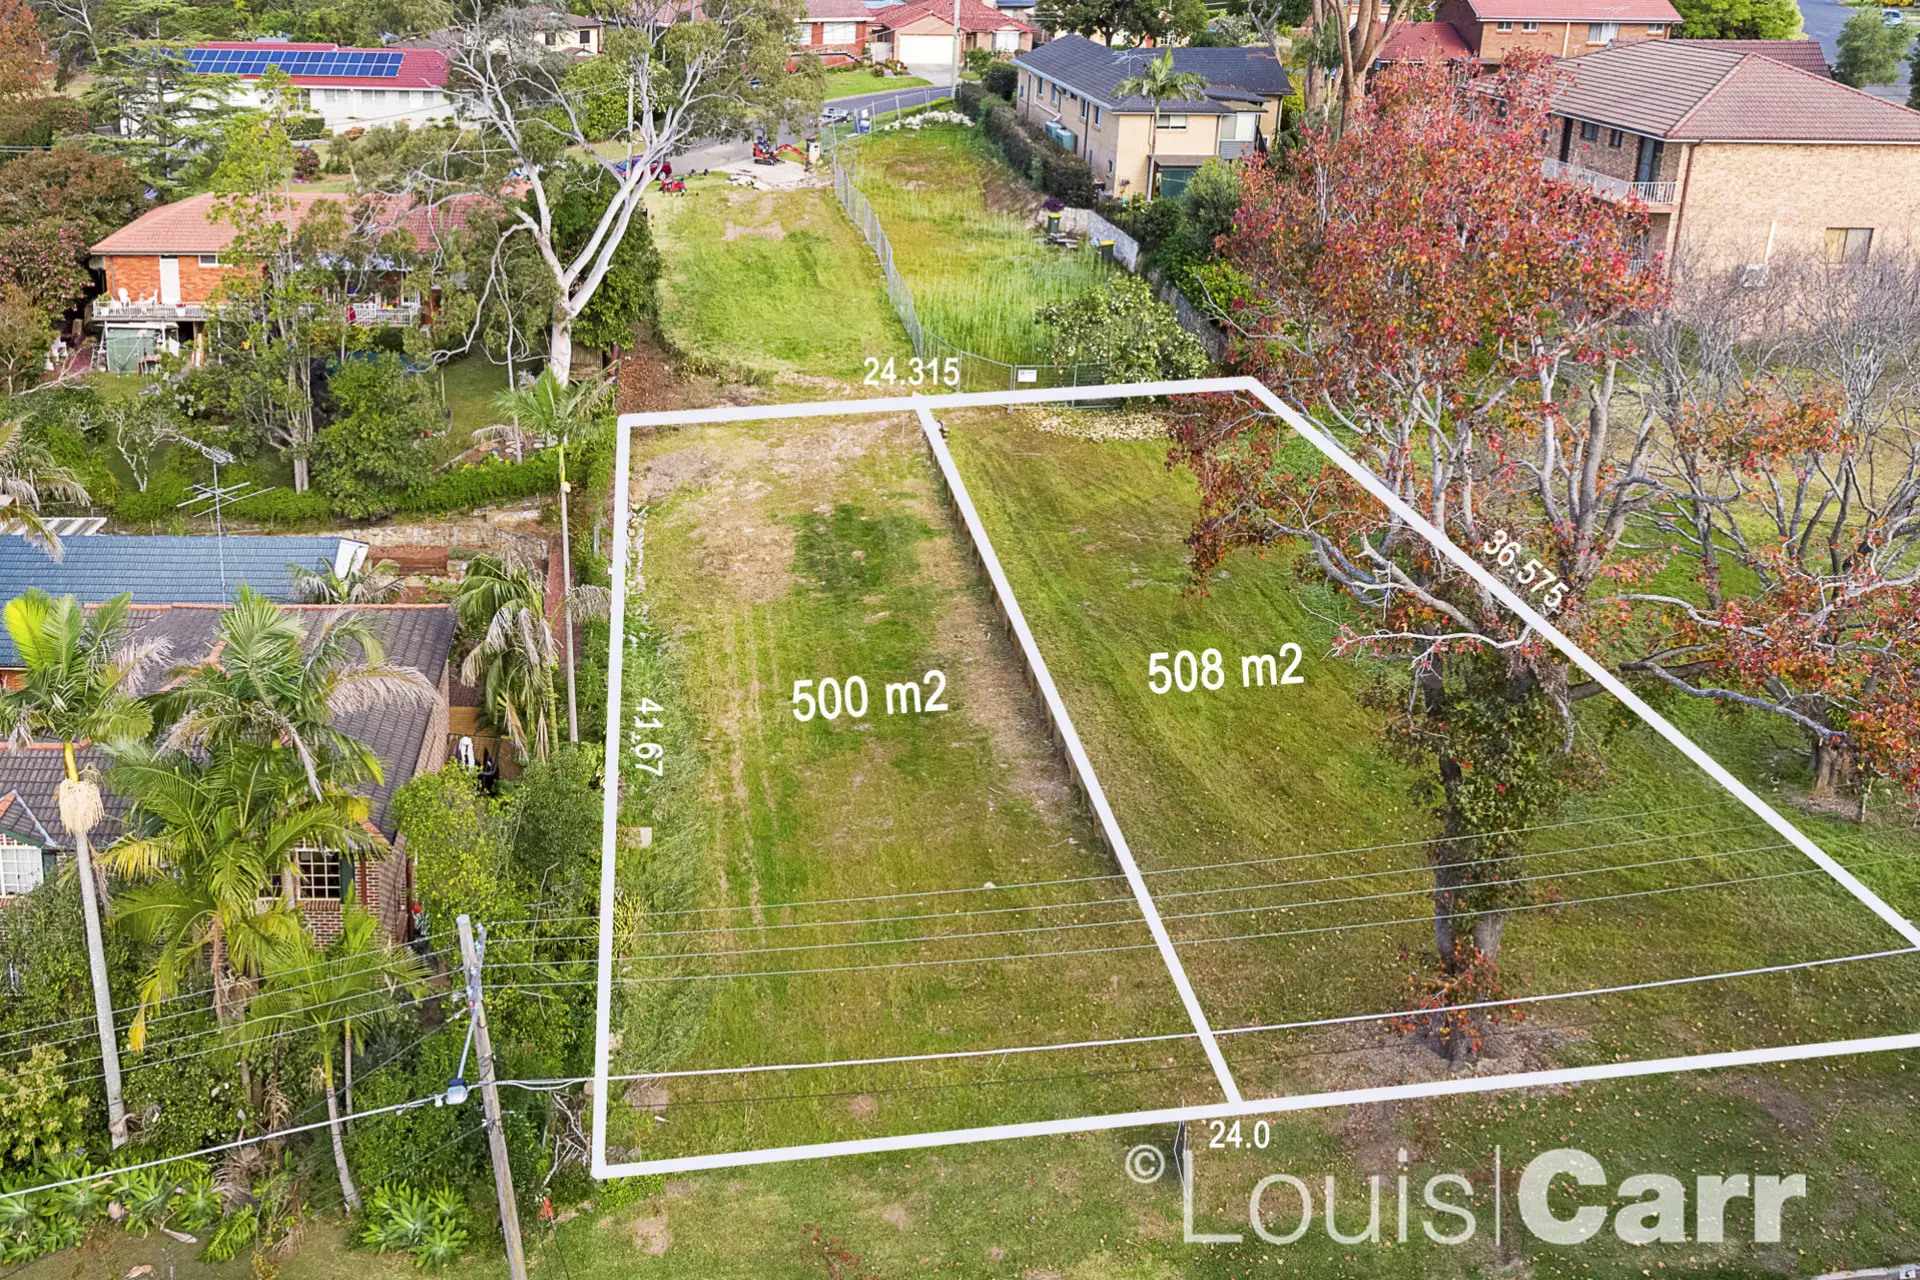 Photo #3: 2 John Savage Crescent, West Pennant Hills - Sold by Louis Carr Real Estate